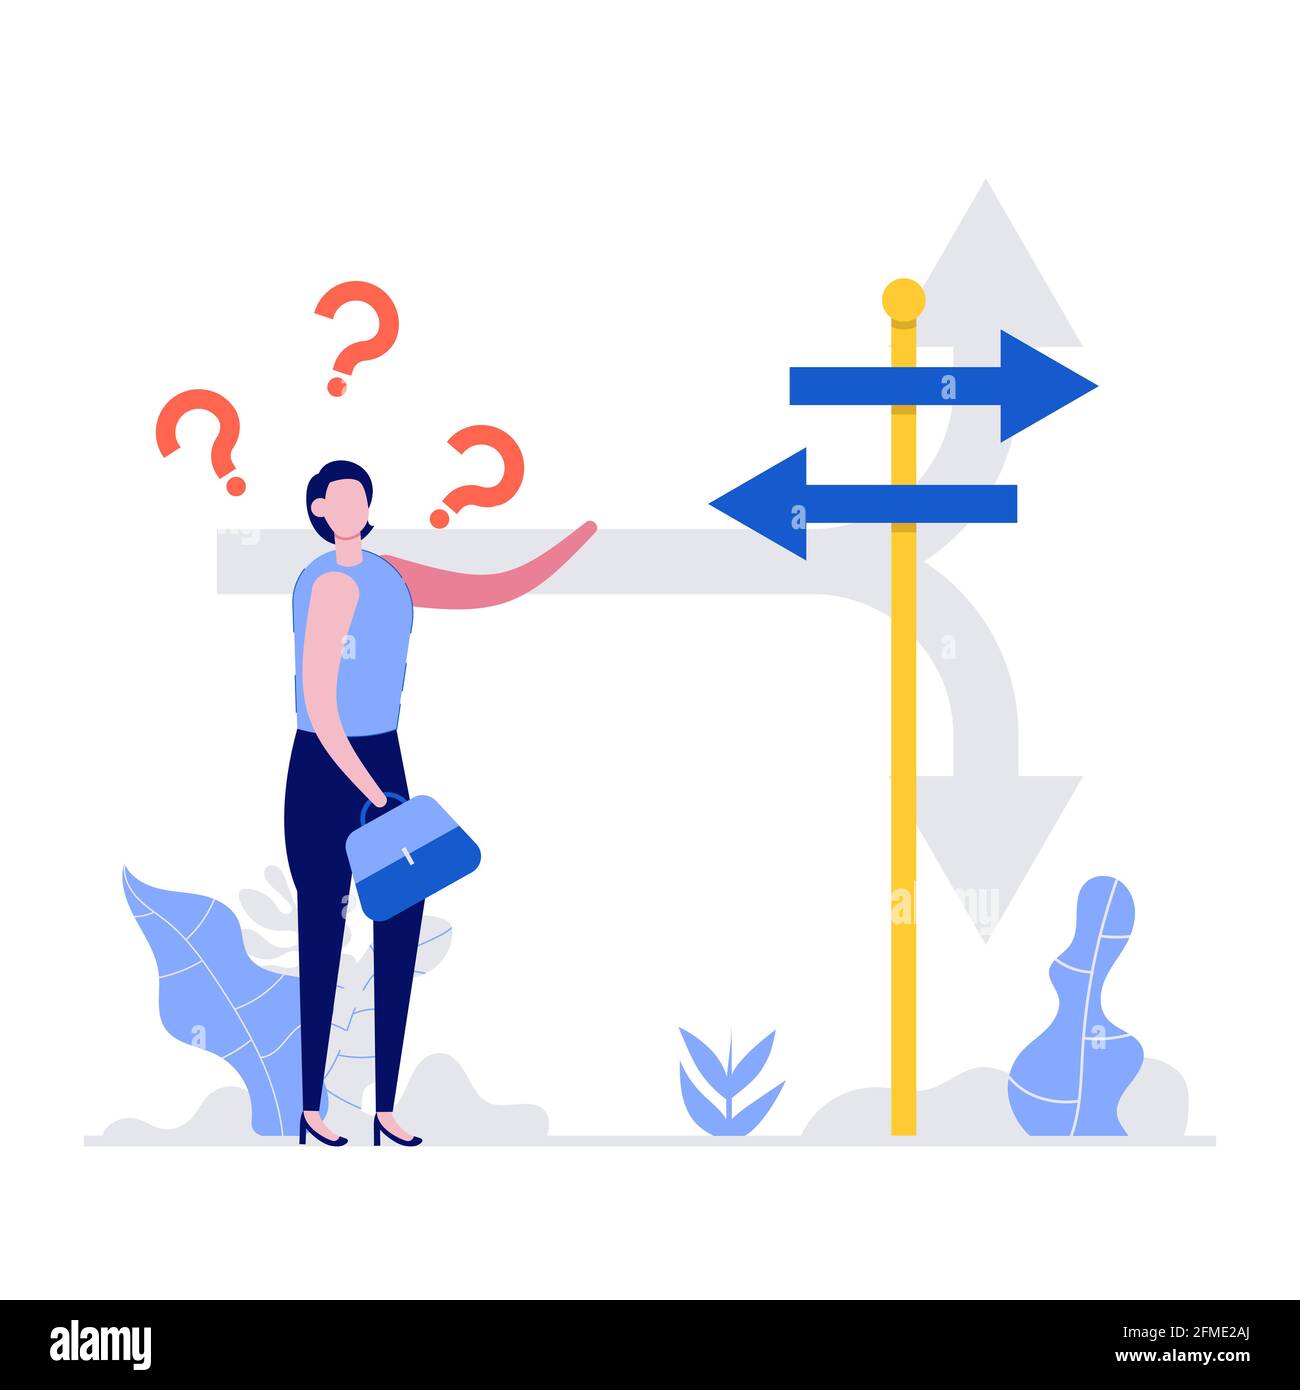 Confused businesswoman standing at a crossroads and looking directional sign arrows. Symbol for choice, career path or opportunities, business concept Stock Vector